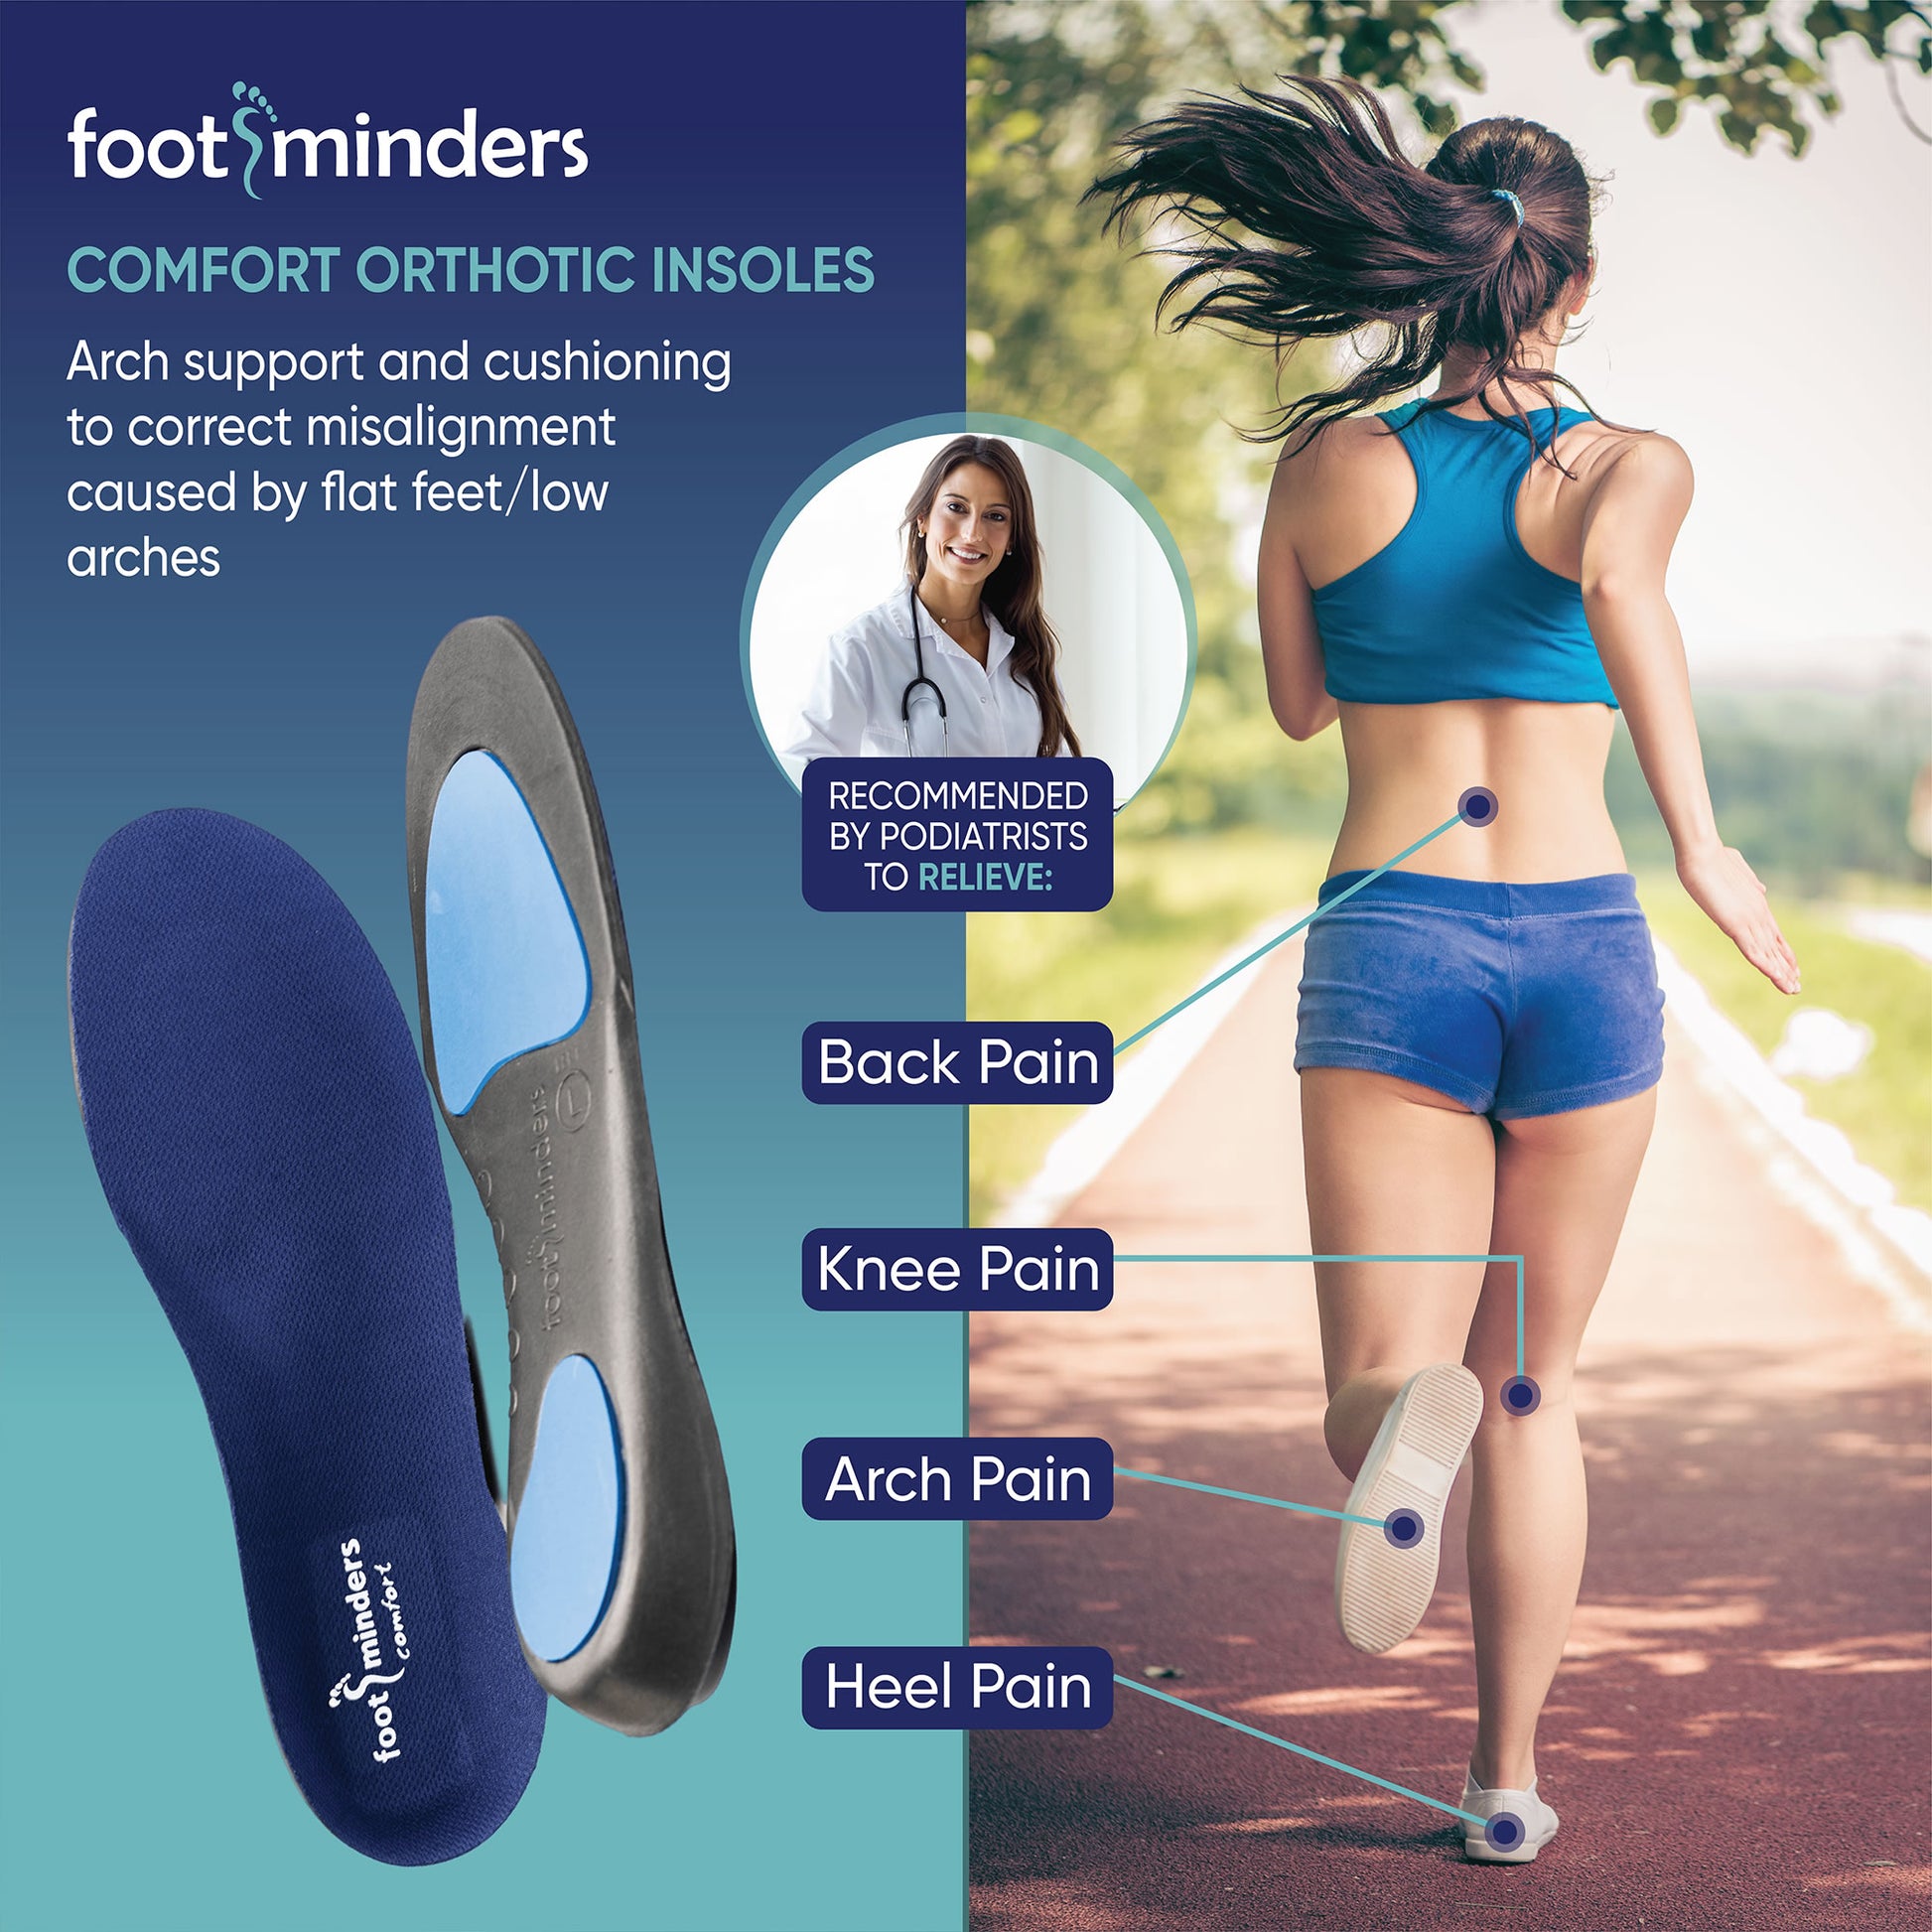 What are the Benefits of Having Arch Support?